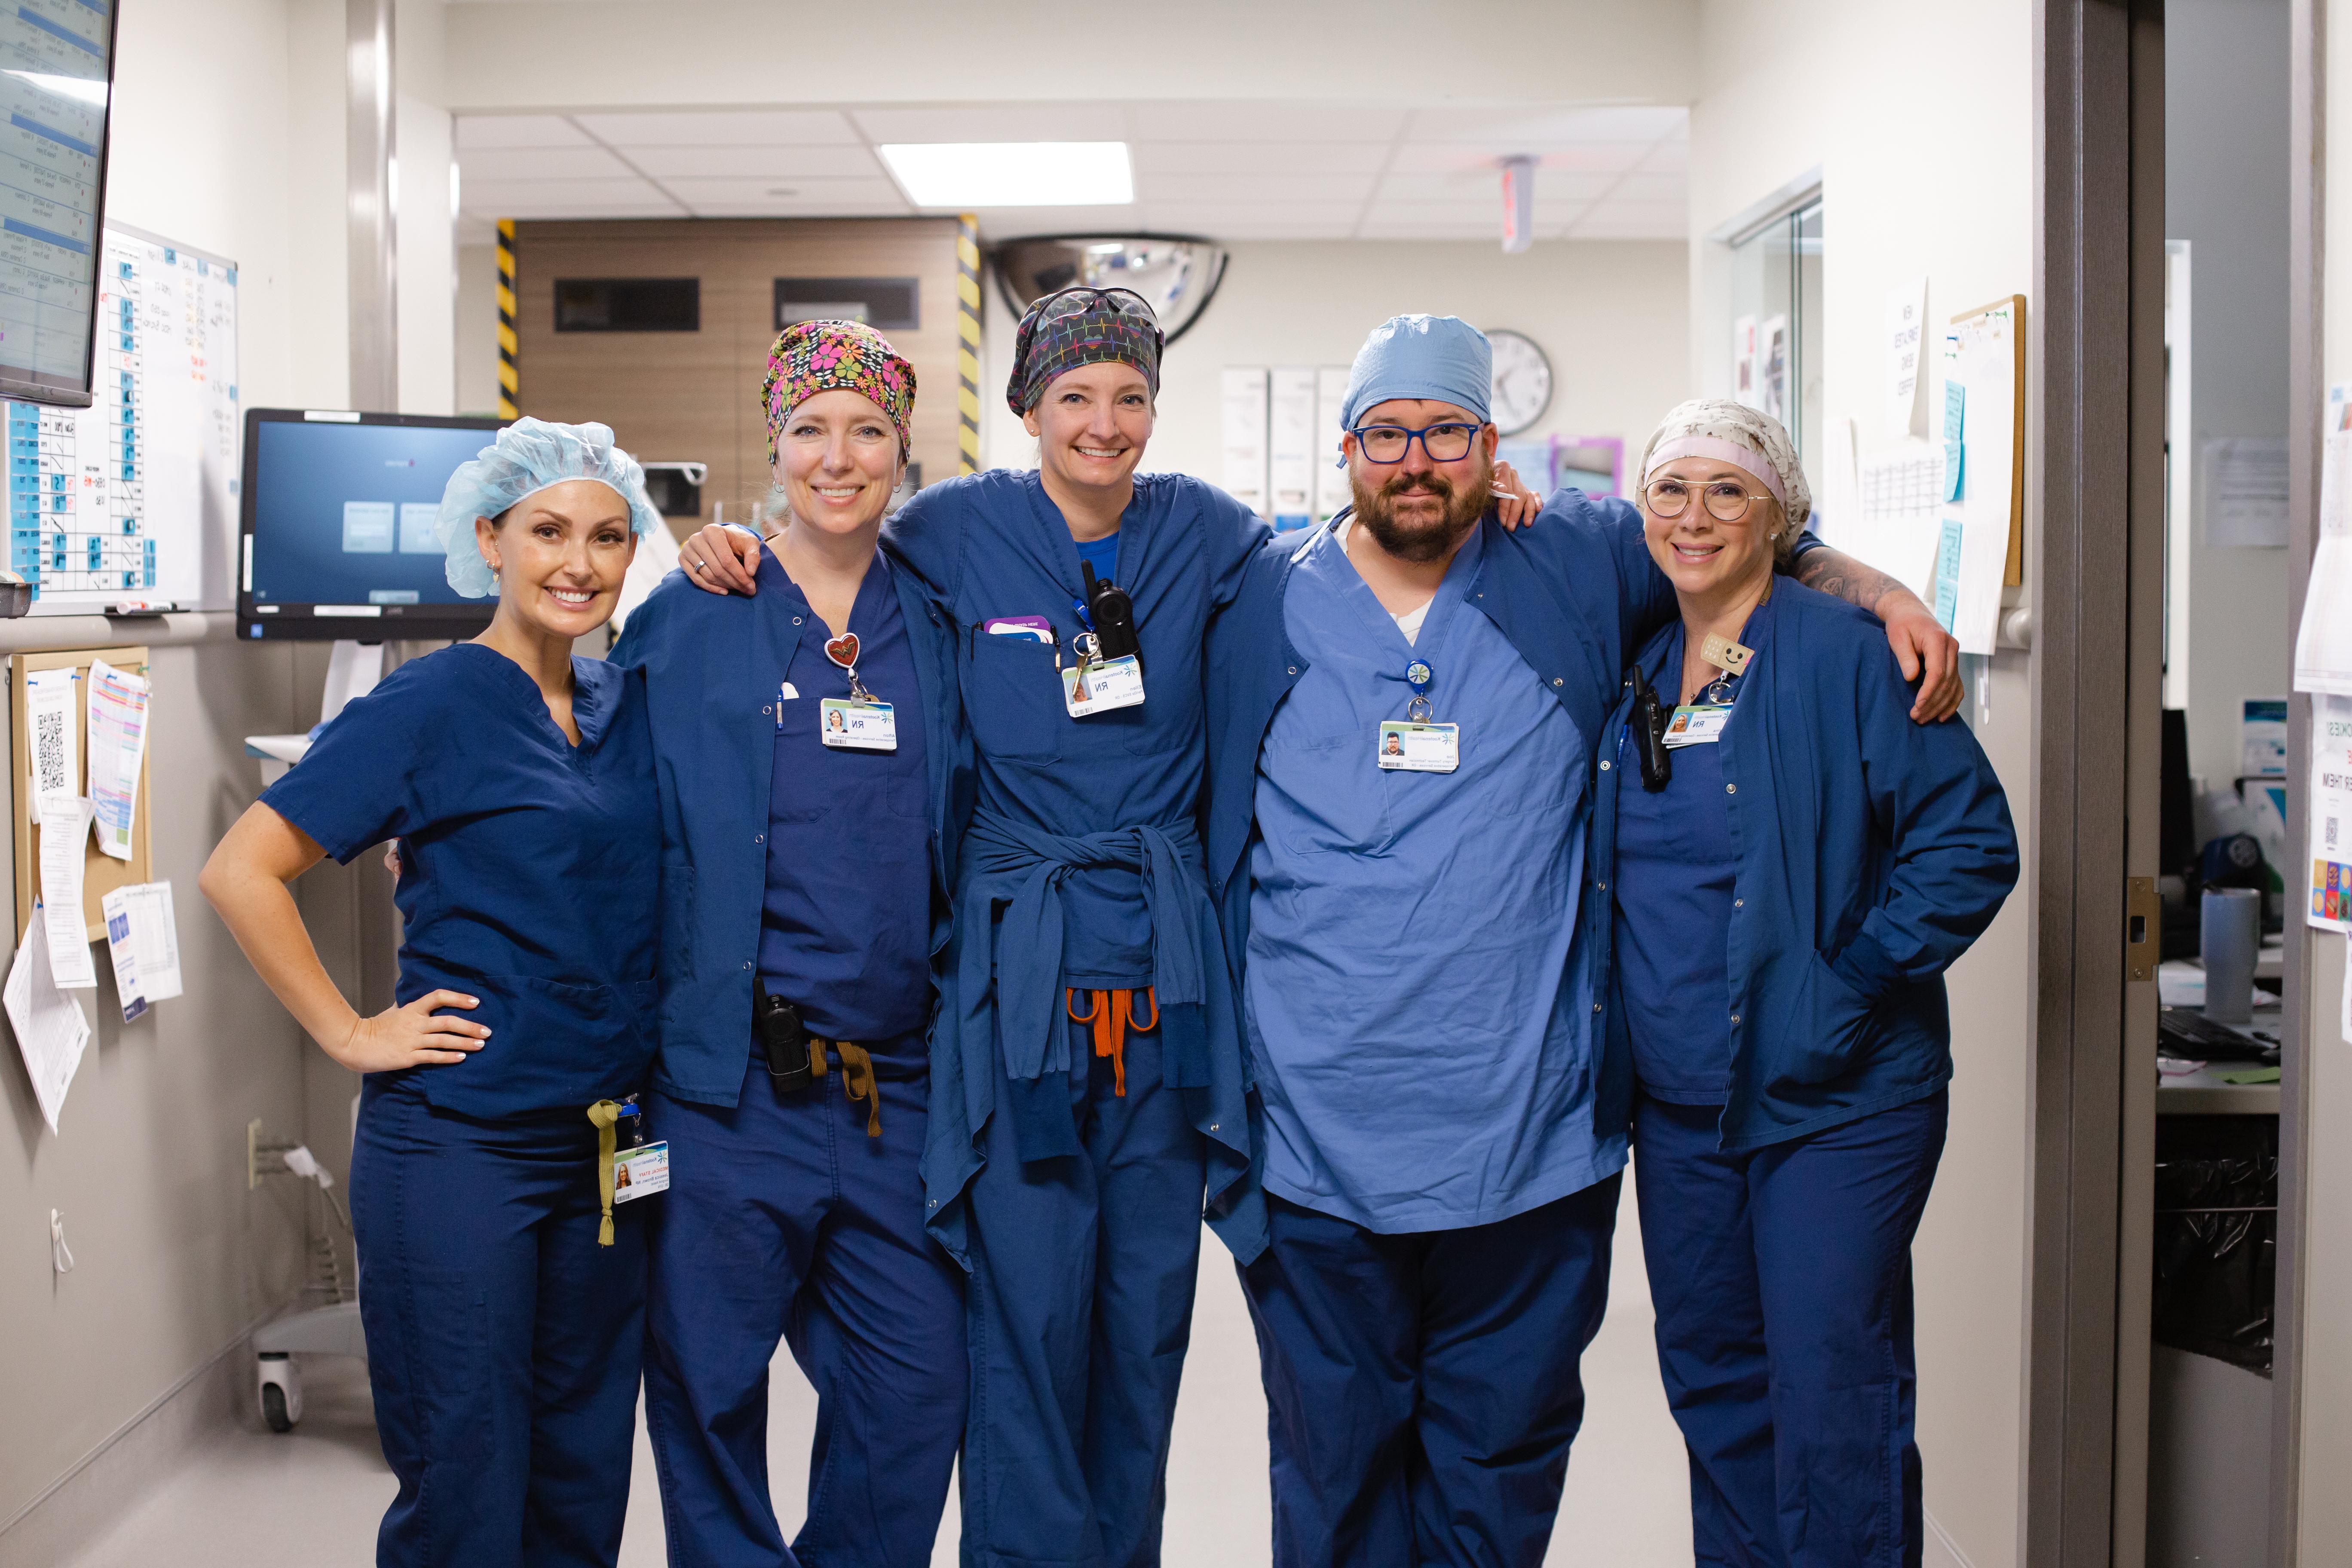 5 nurses in blue scrubs stand together with arms around each other